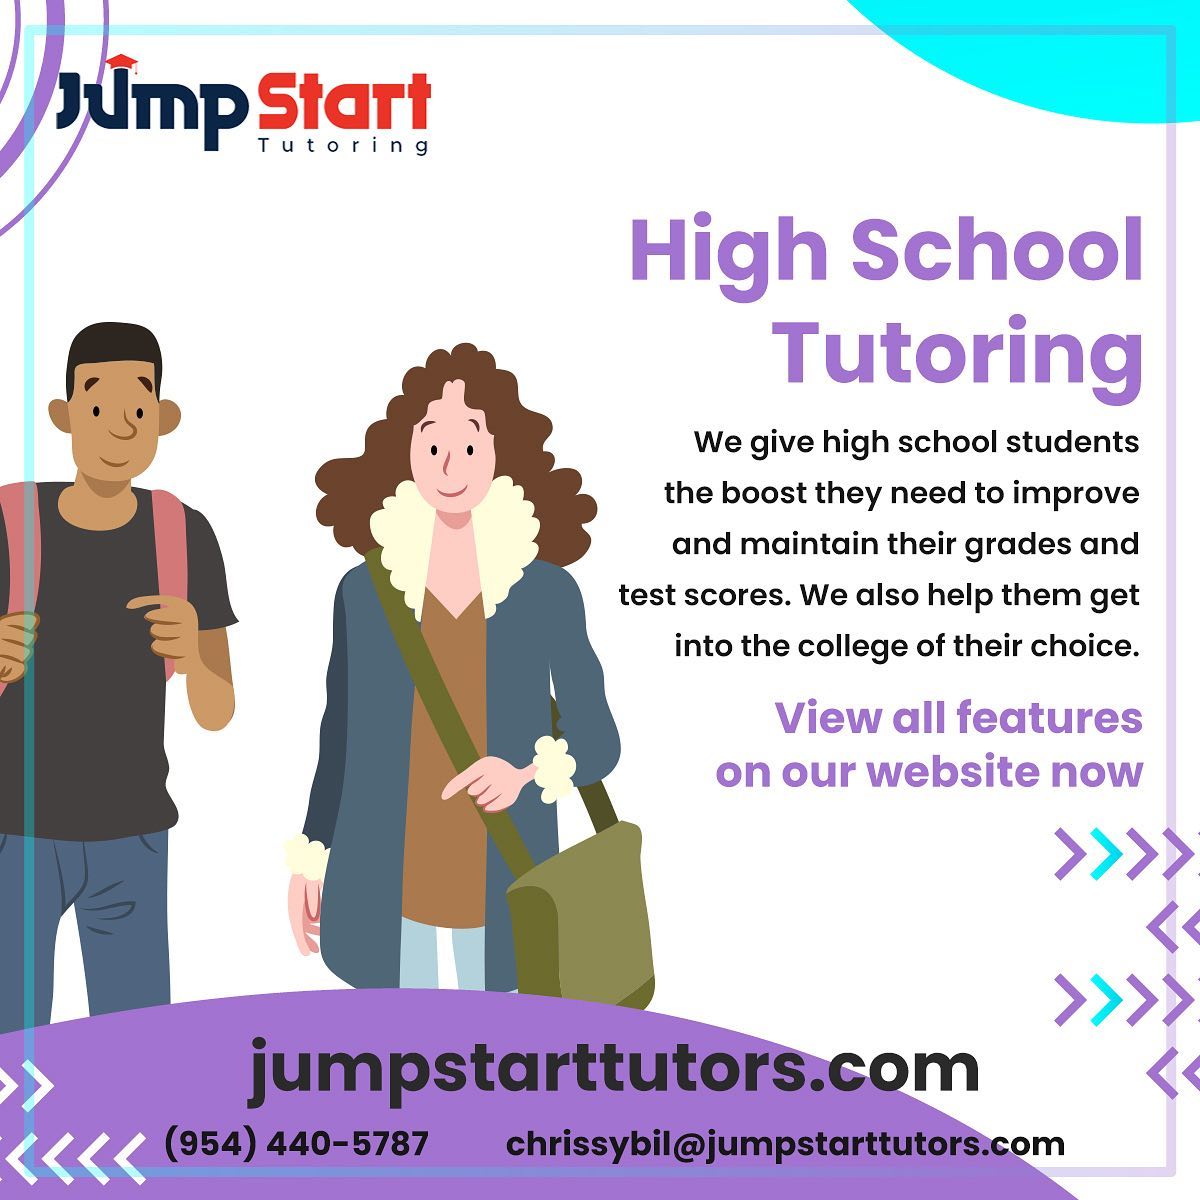 5 Star Rated K-12 Tutoring with Prestigious Tutors & Customized Lessons | College Course Entry & Test Prep 3